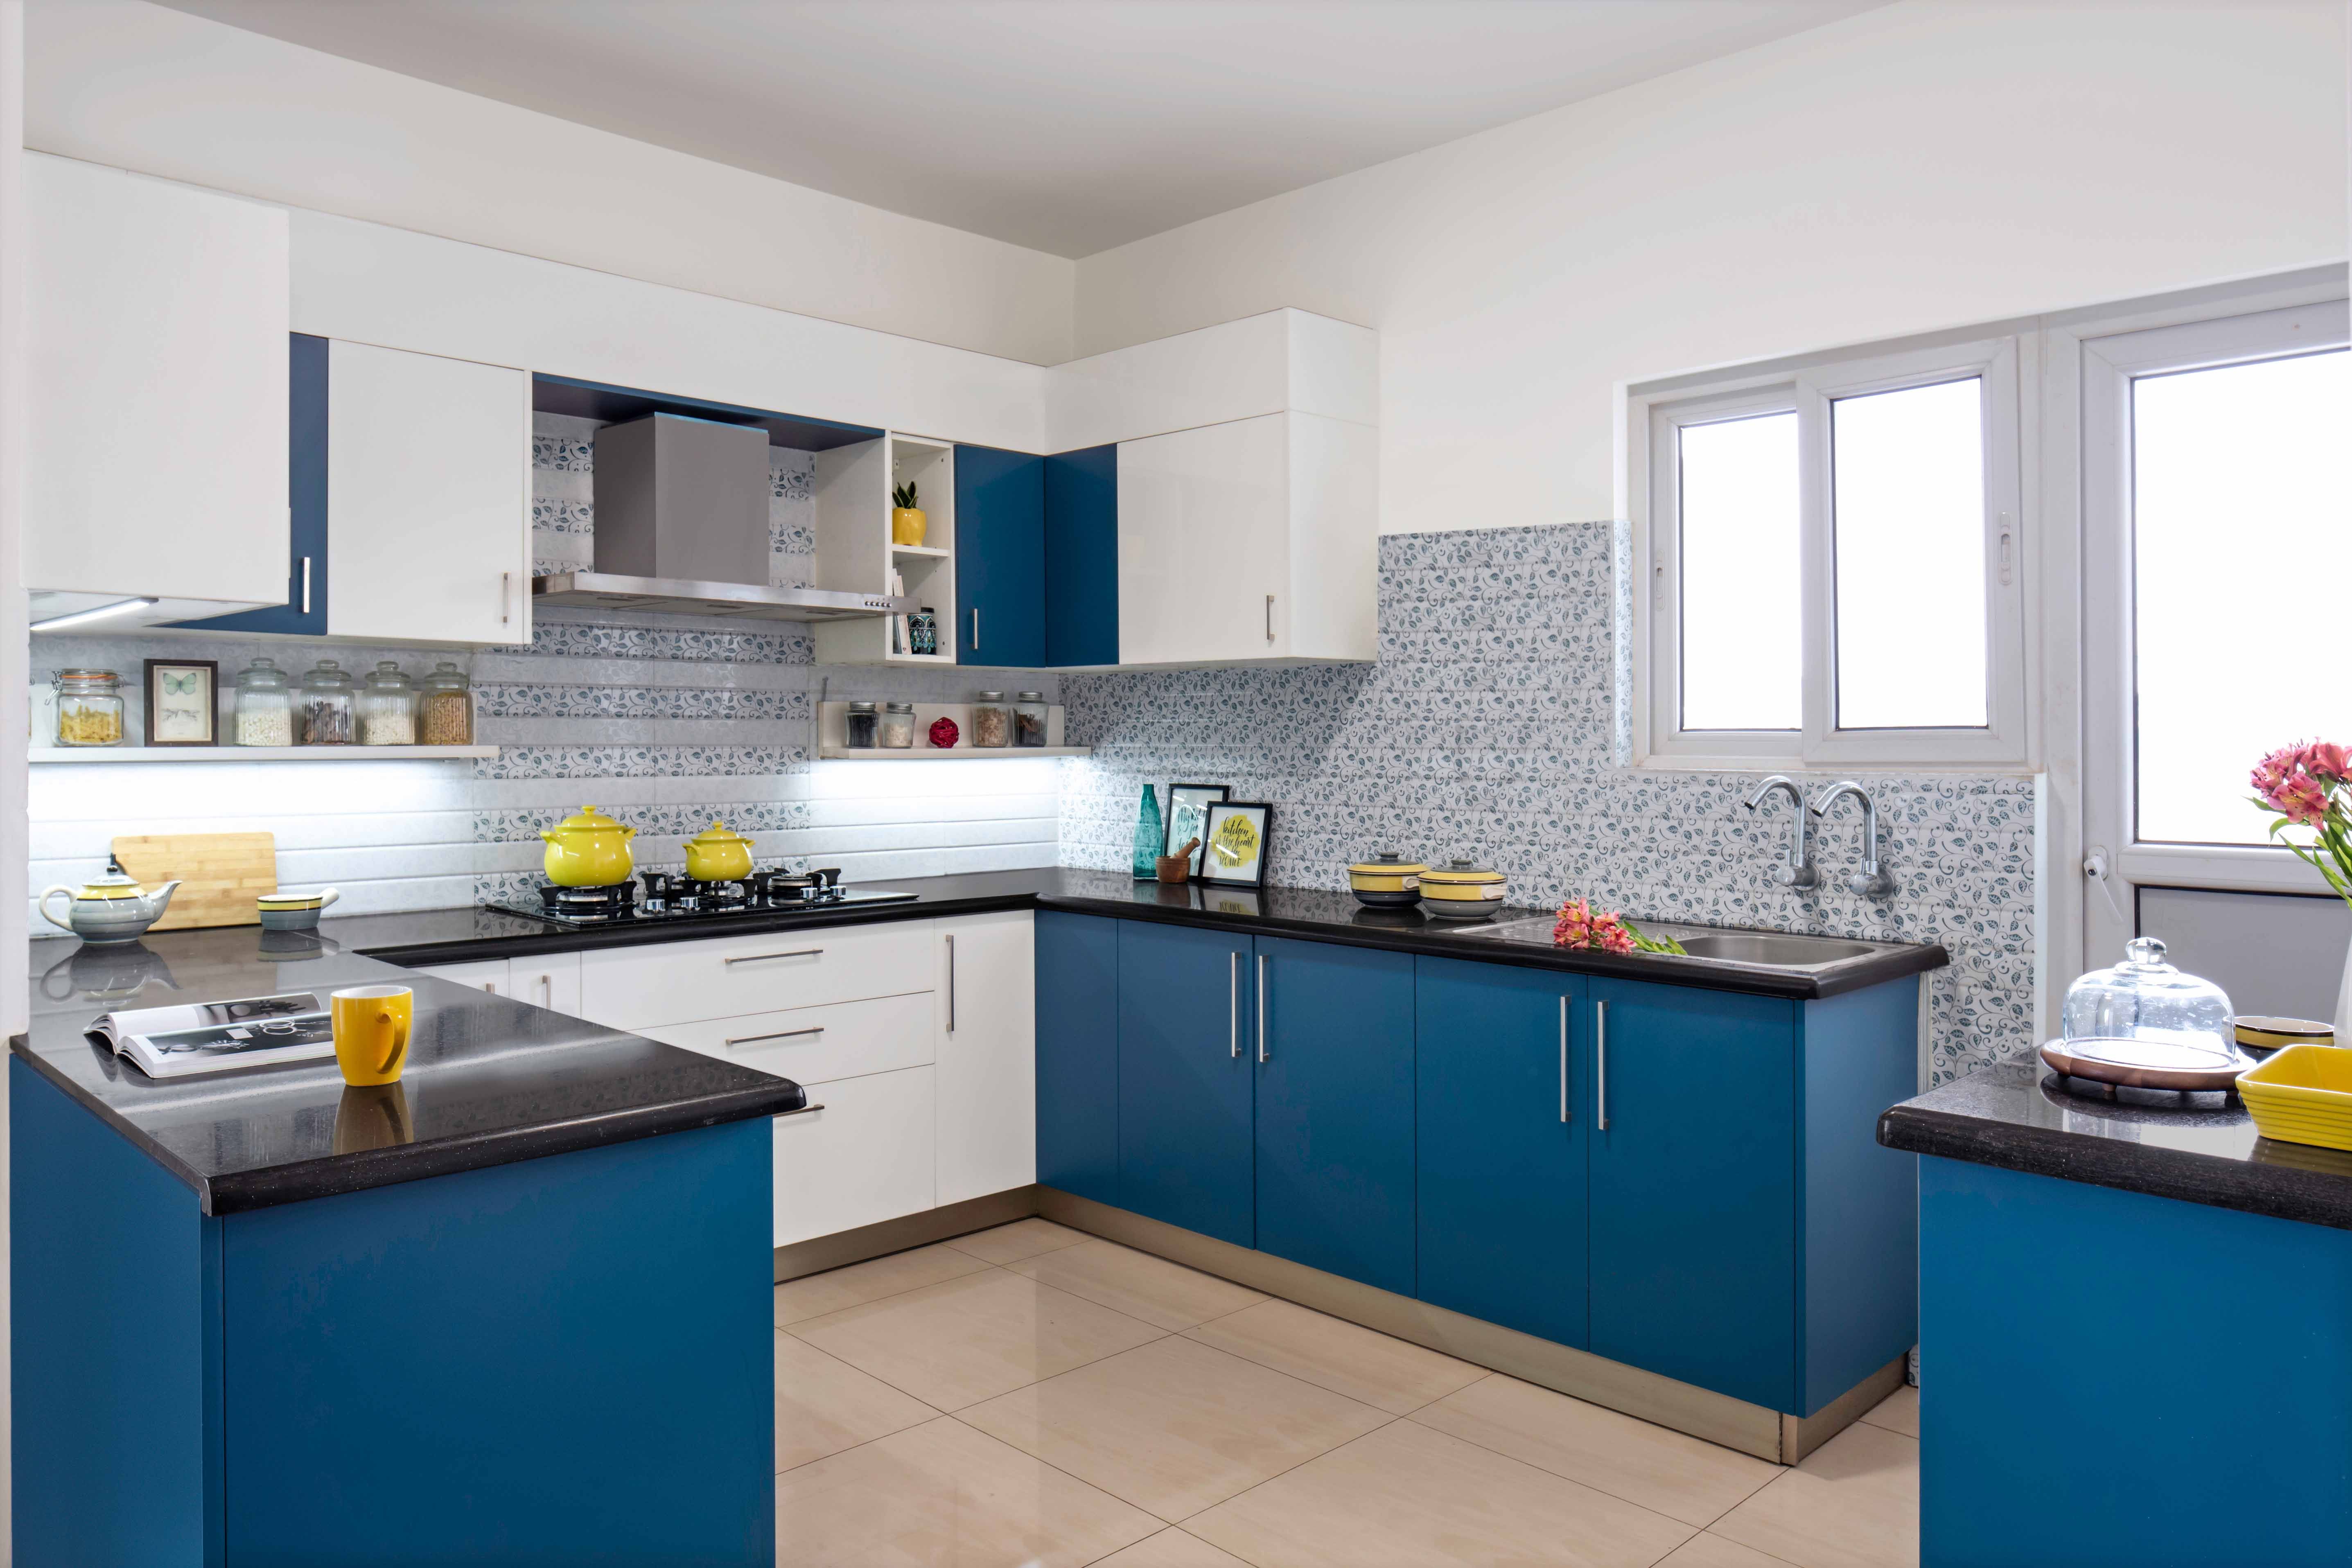 Contemporary 2-BHK Flat In Bangalore With Blue And White U-Shaped Kitchen